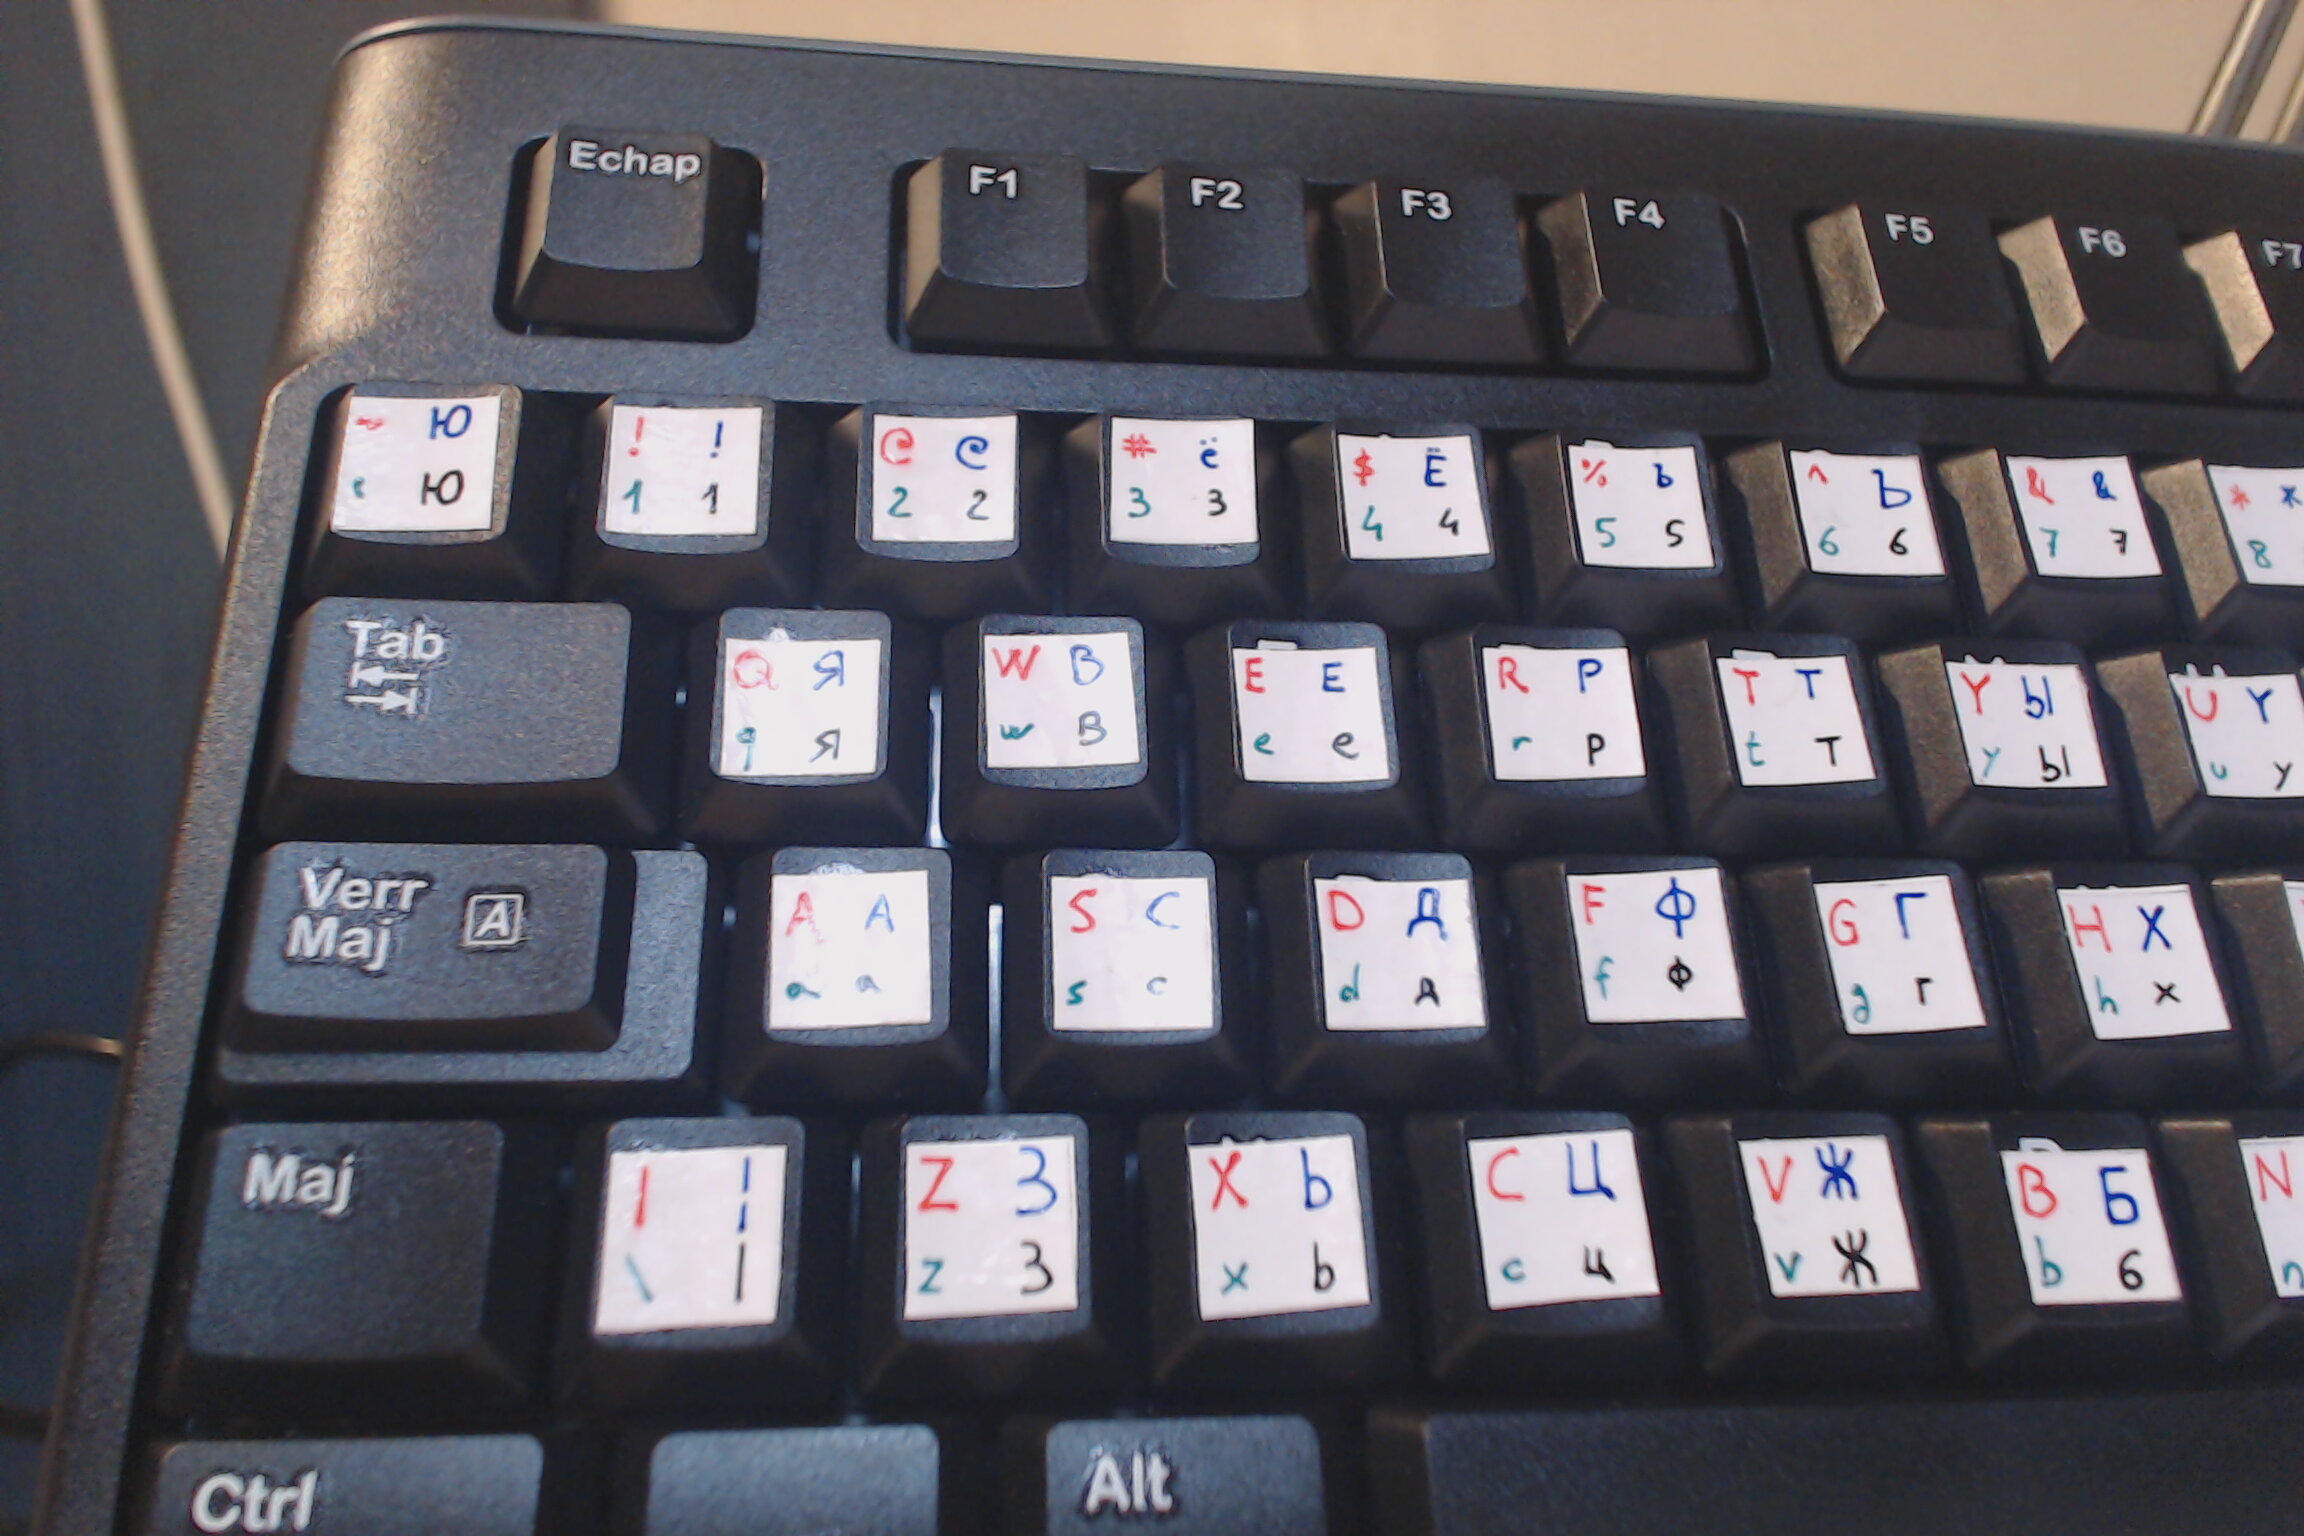 My hand-made Russian (phonetic) keyboards, image 8 of 14